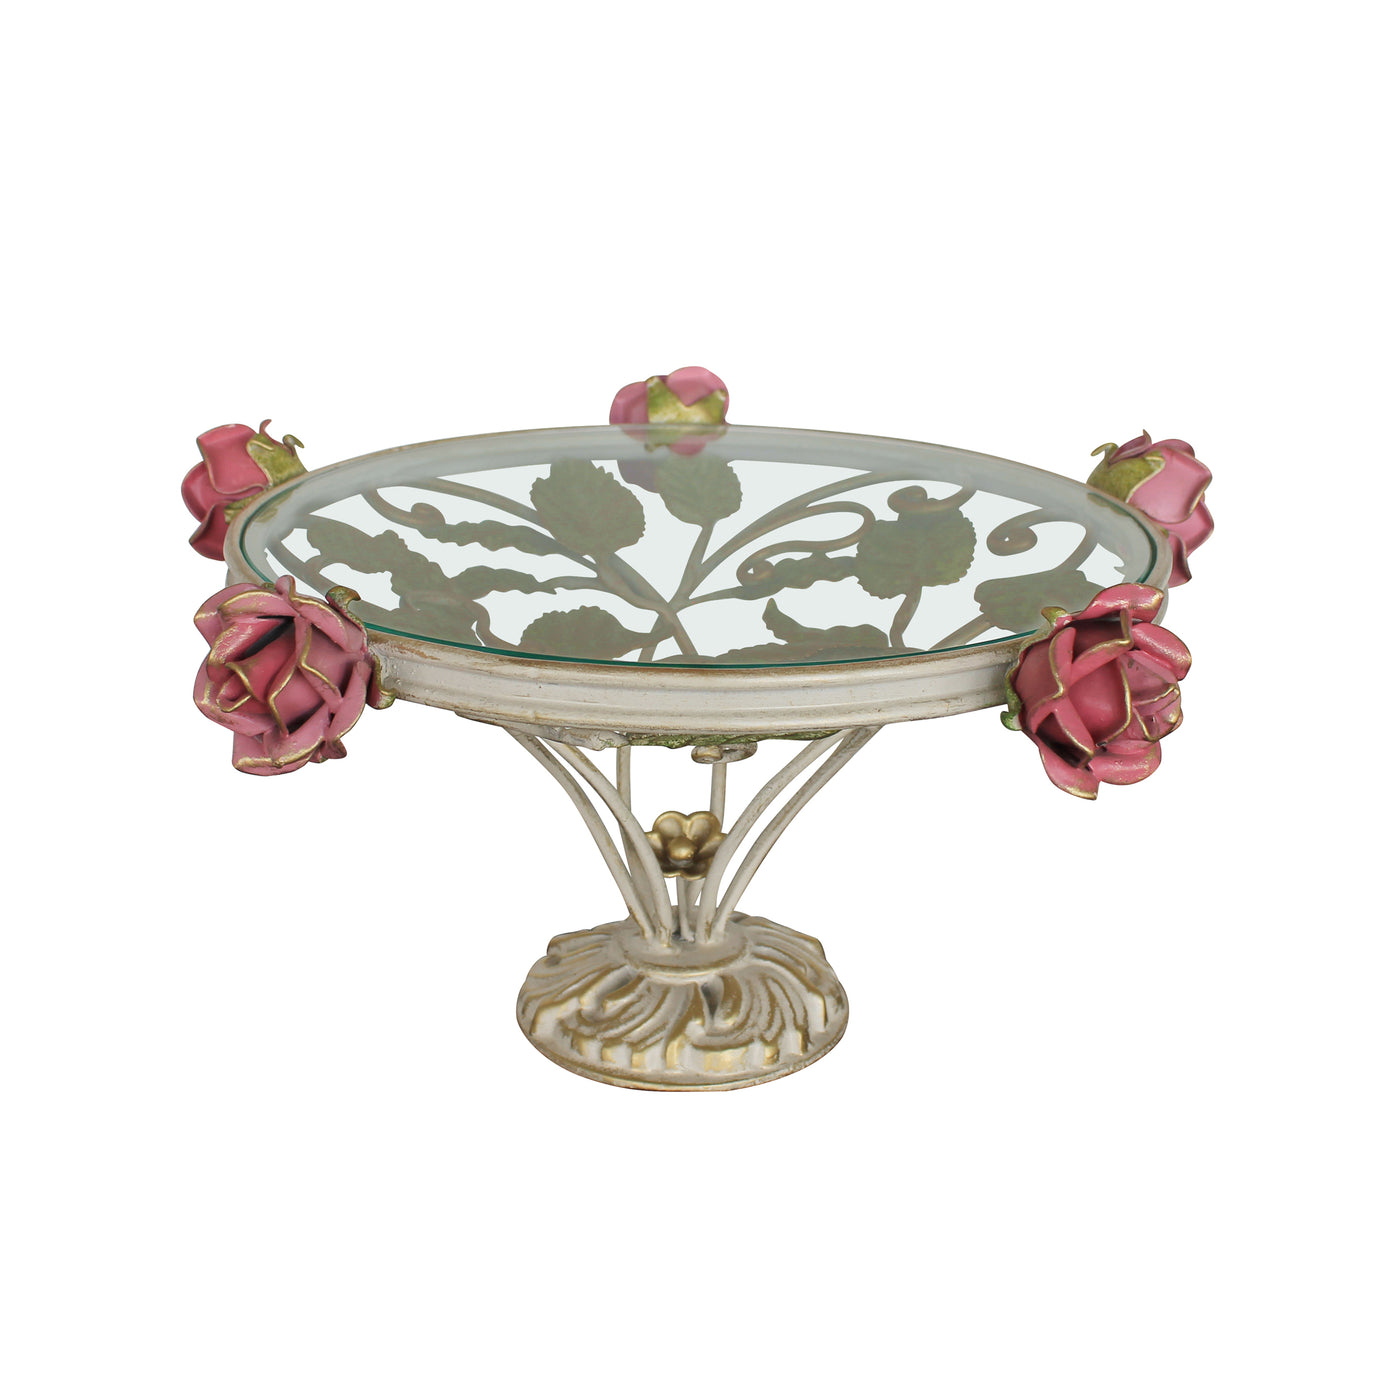 A decorative cake stand with a base adorned with leaves and roses inspired from nature topped with a round clear glass